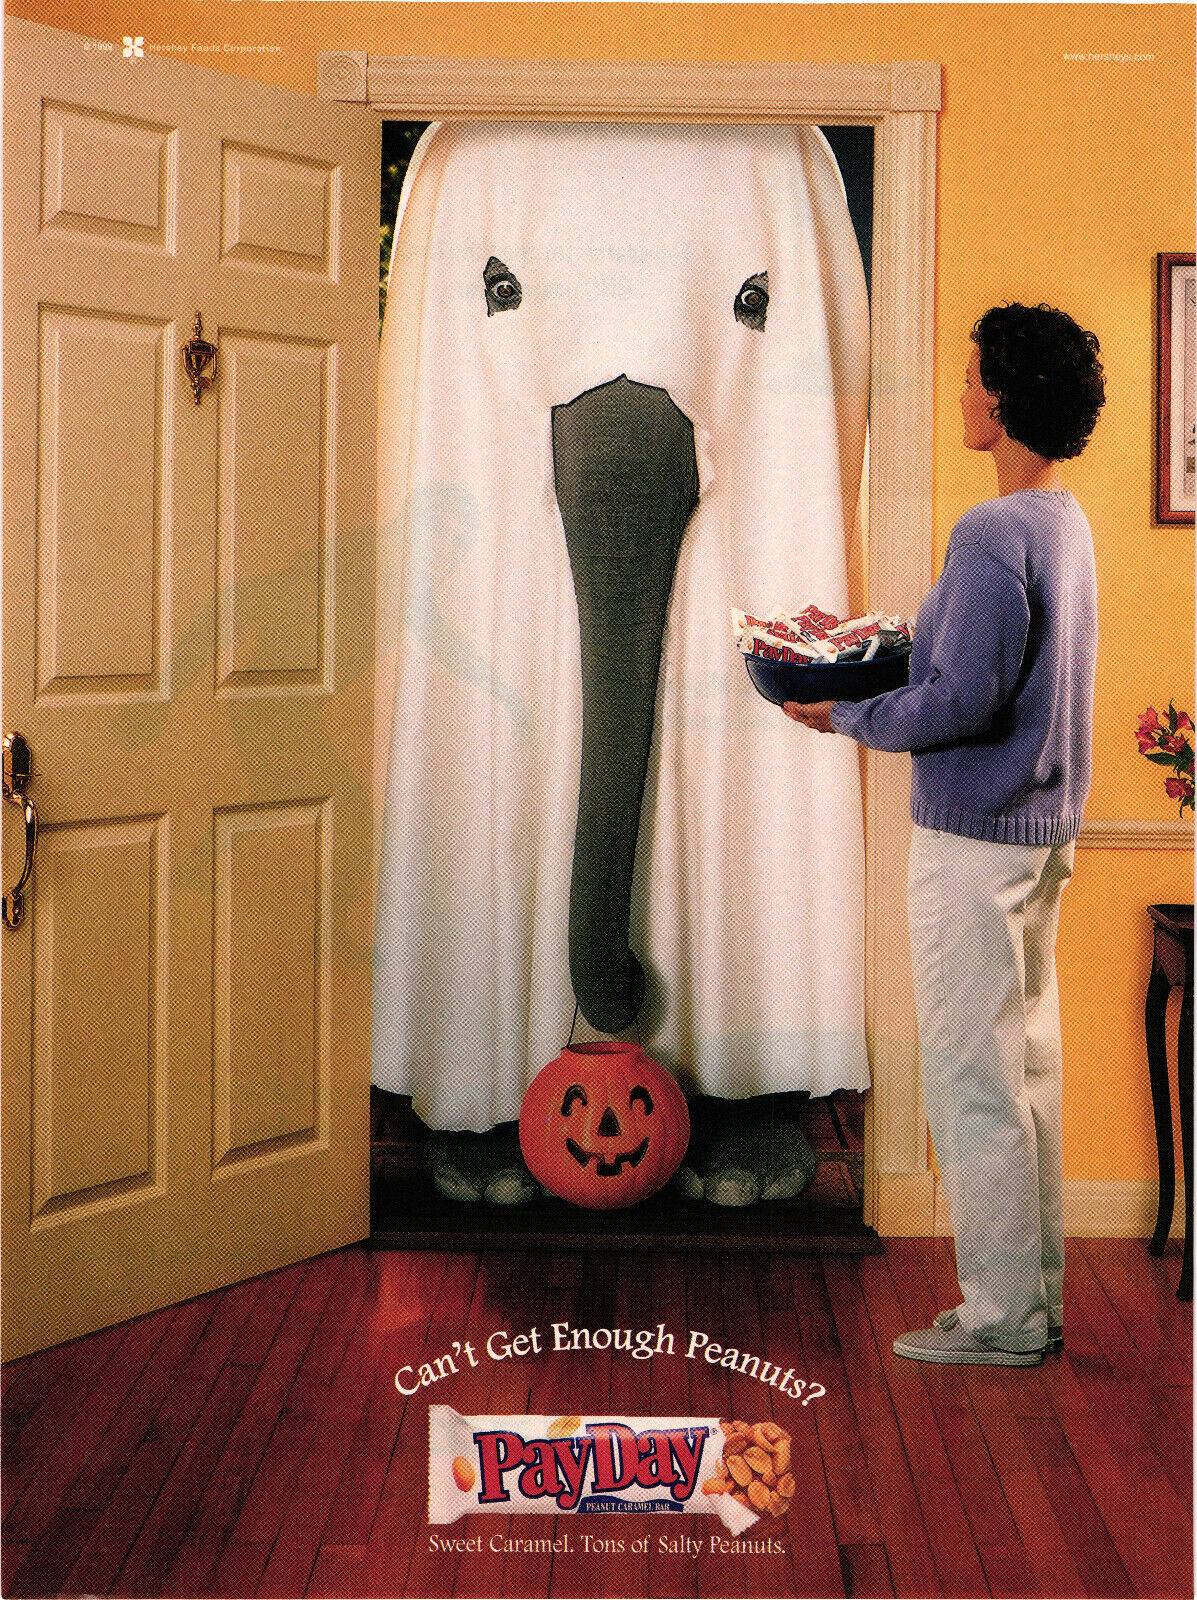 PayDay Can\'t Get Enough Peanuts? Elephant Dressed as Ghost Print Advert